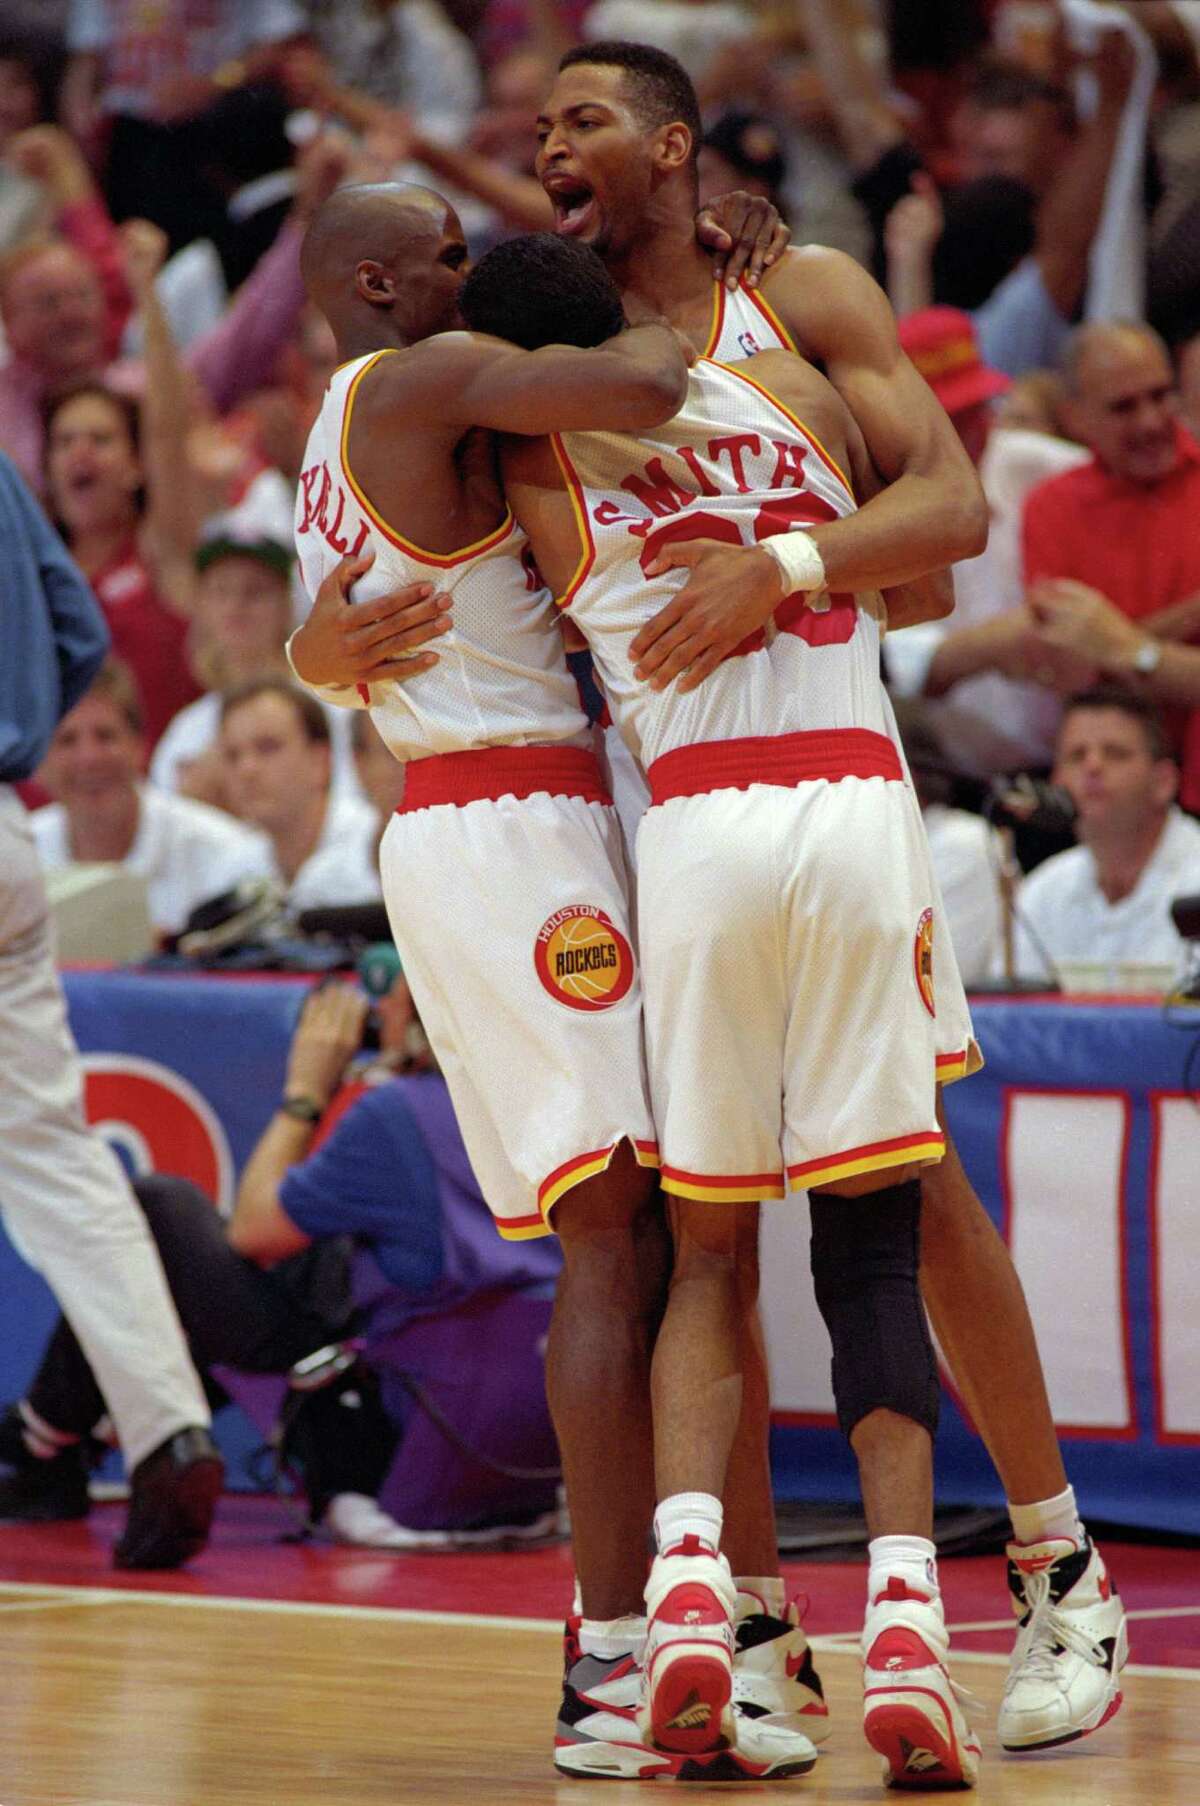 06/22/1994 - Houston Rockets teammates Vernon Maxwell, Kenny Smith, and Robert Horry celebrate after the Rockets won the NBA Championship beating the New York Knicks June 22, 1994.